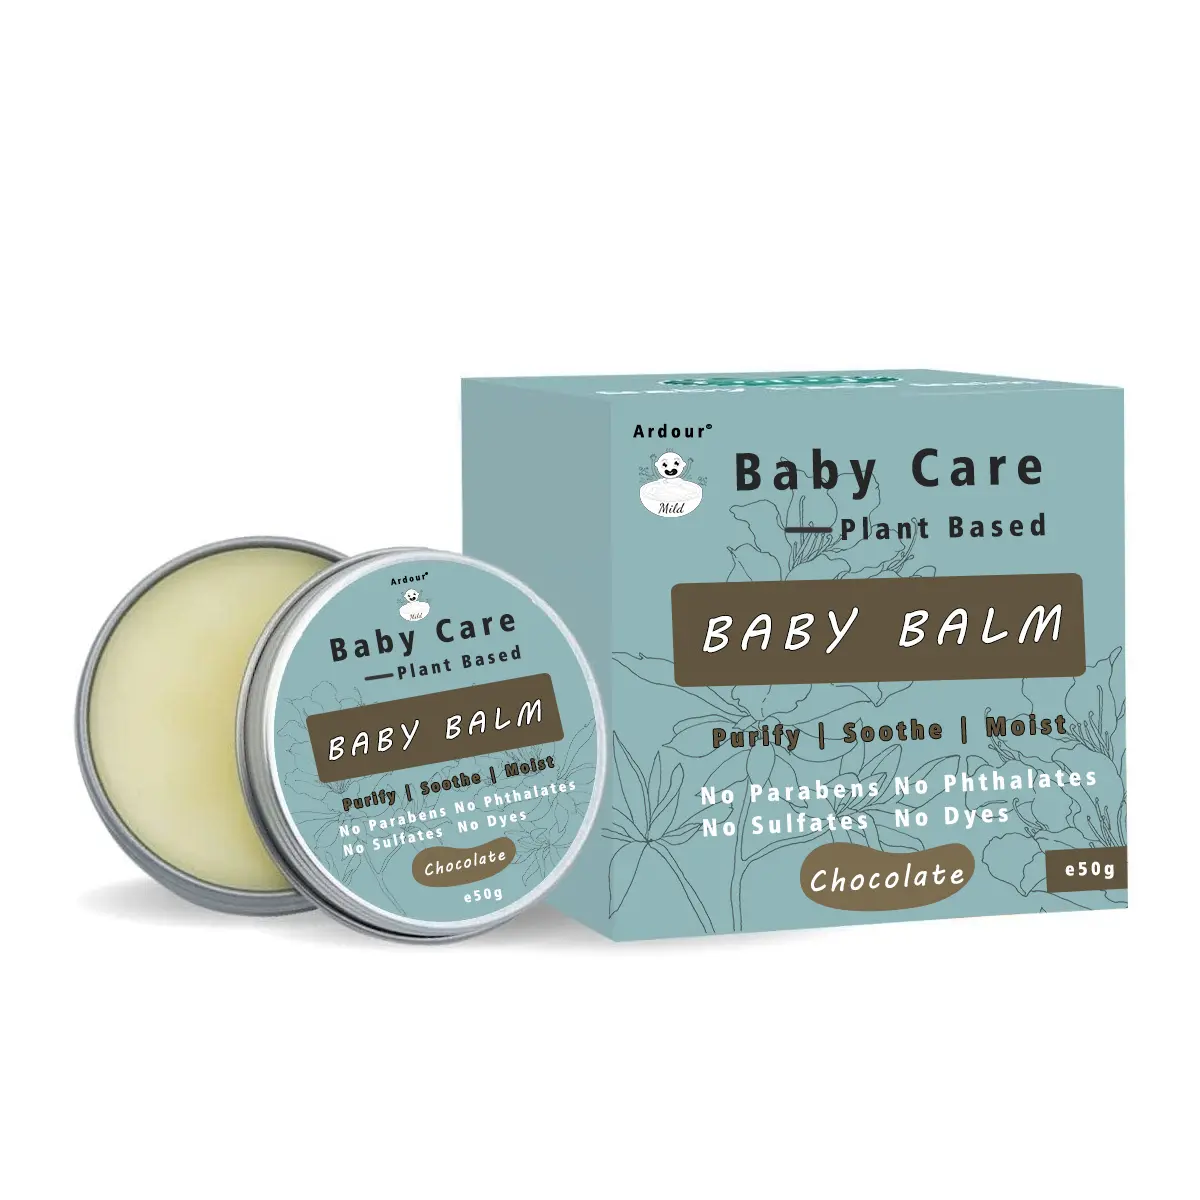 Chocolate Baby Balm Oil Butter Cream Lotion Gentle For Baby Body And Face Skin Care For Babies Kids Children Newborn Infants